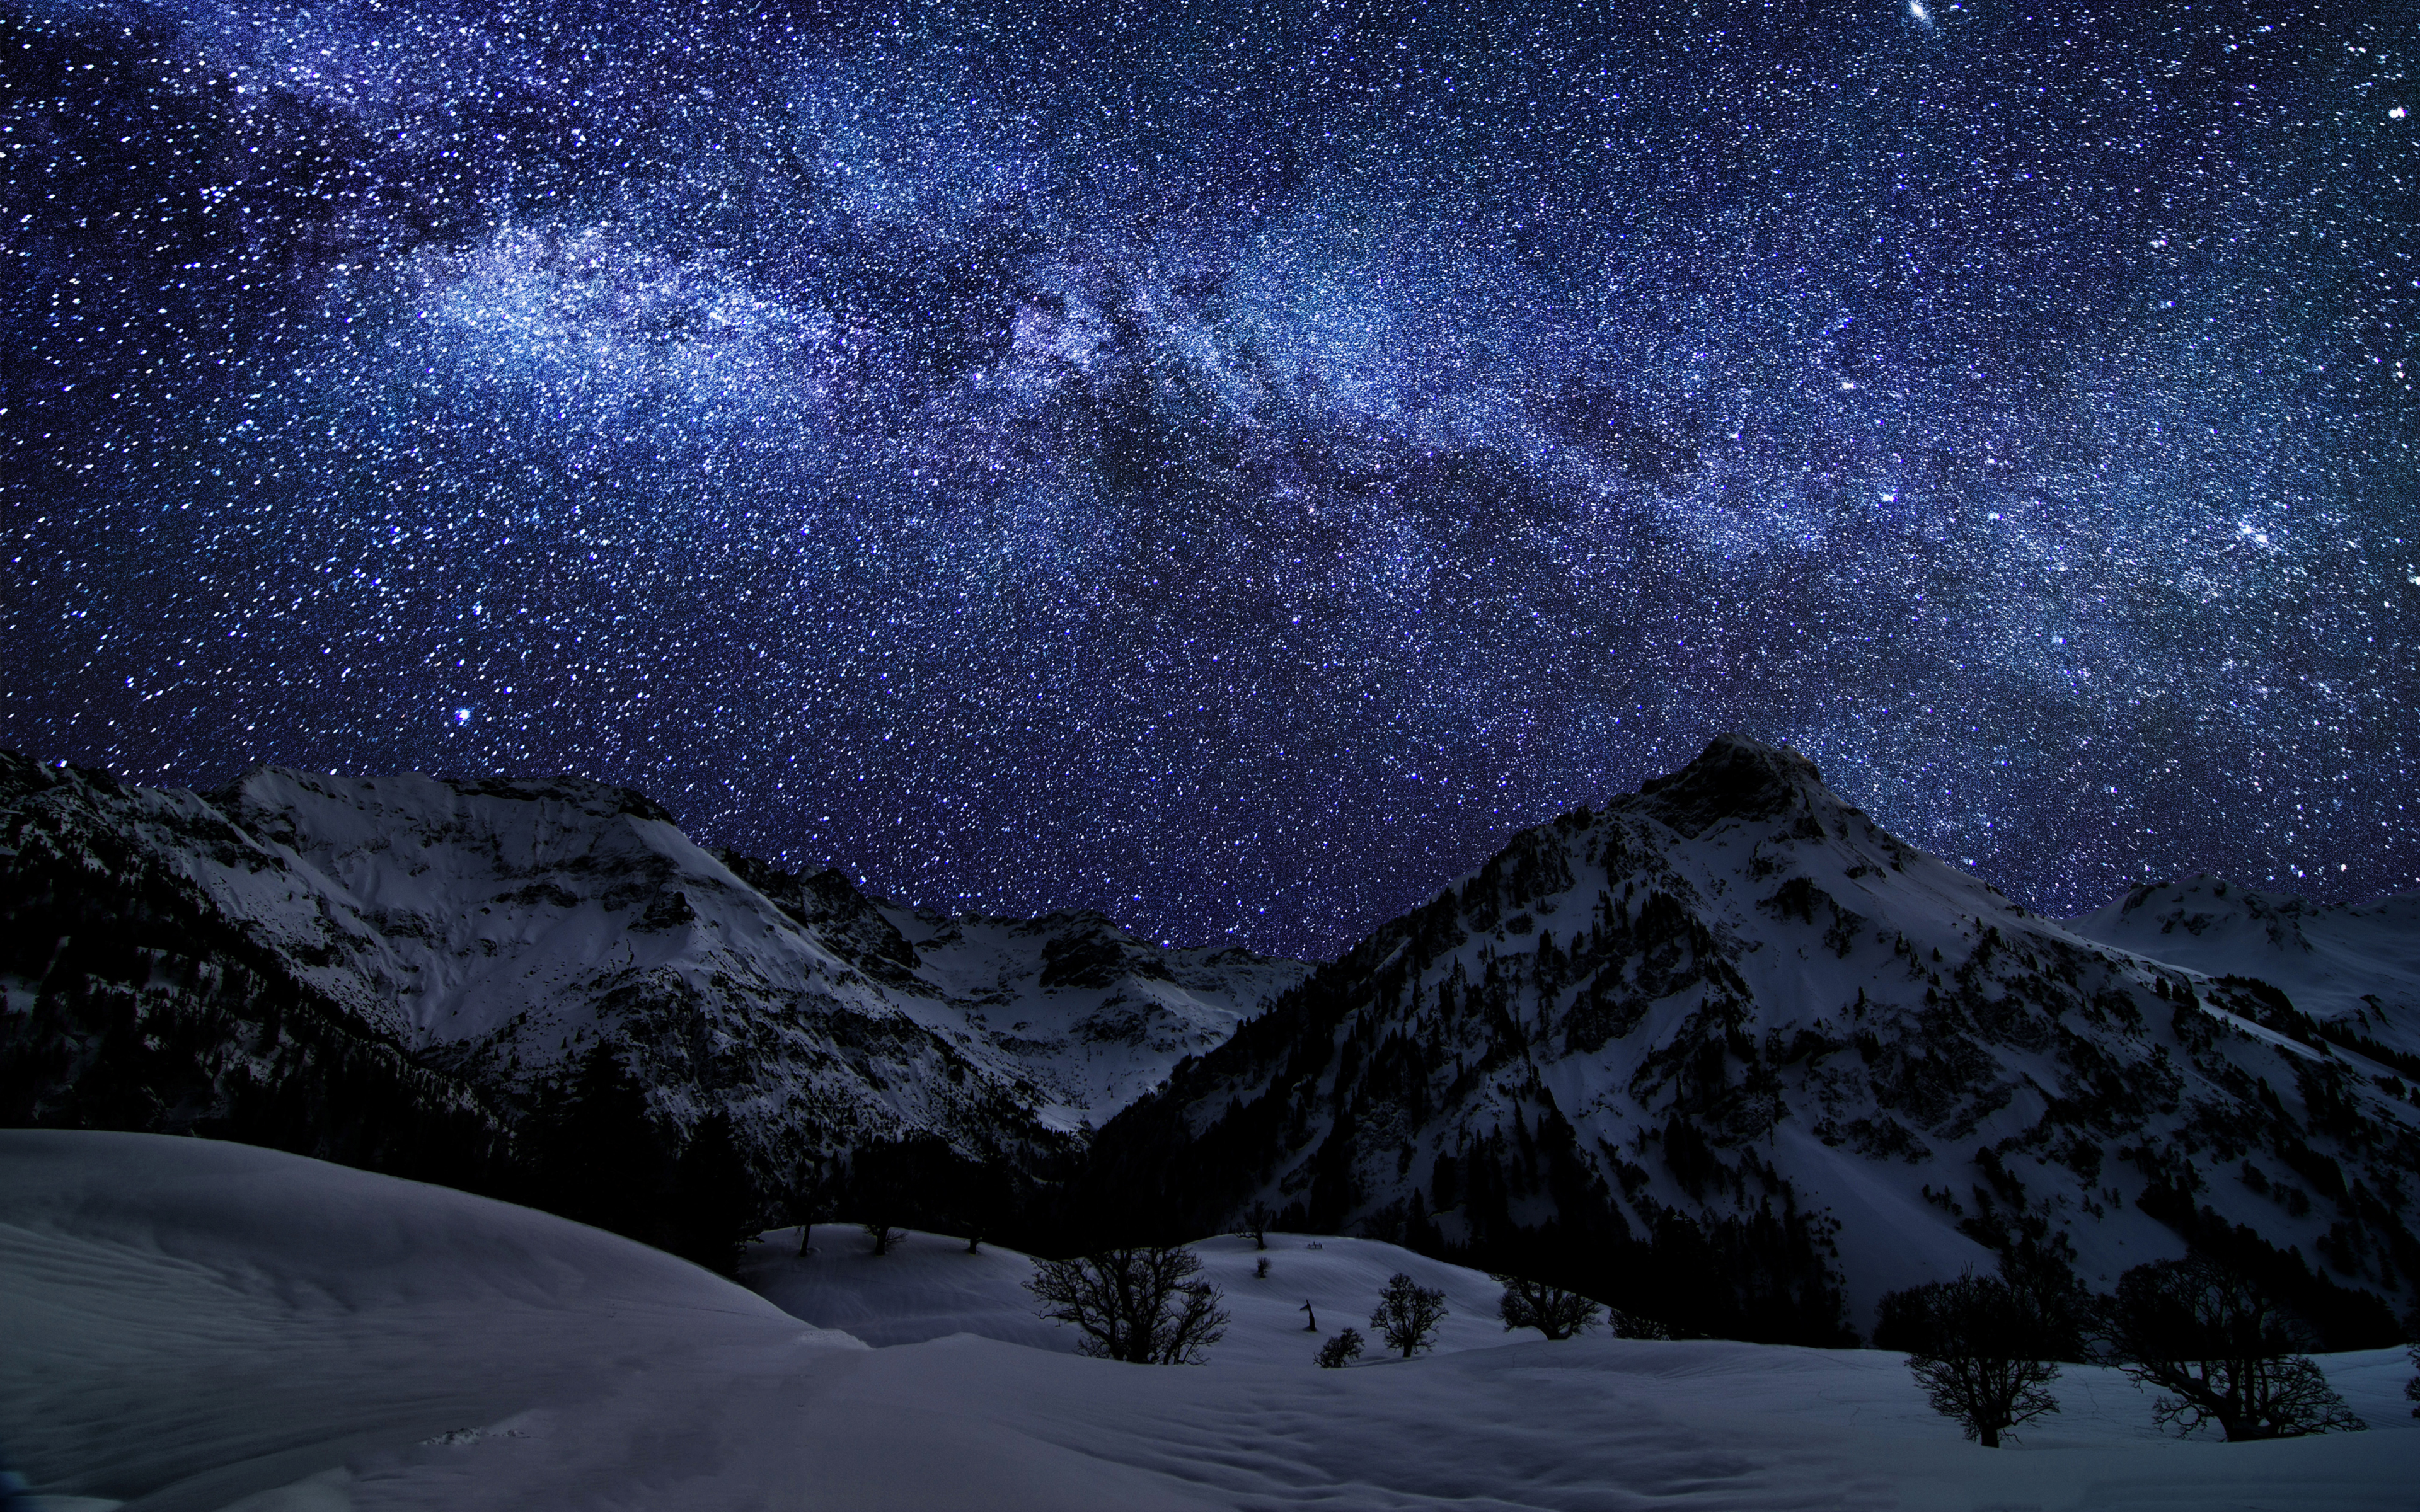 Glacier mountains Wallpaper 4K, Snow covered, Night time, Landscape, Milky Way, Nature